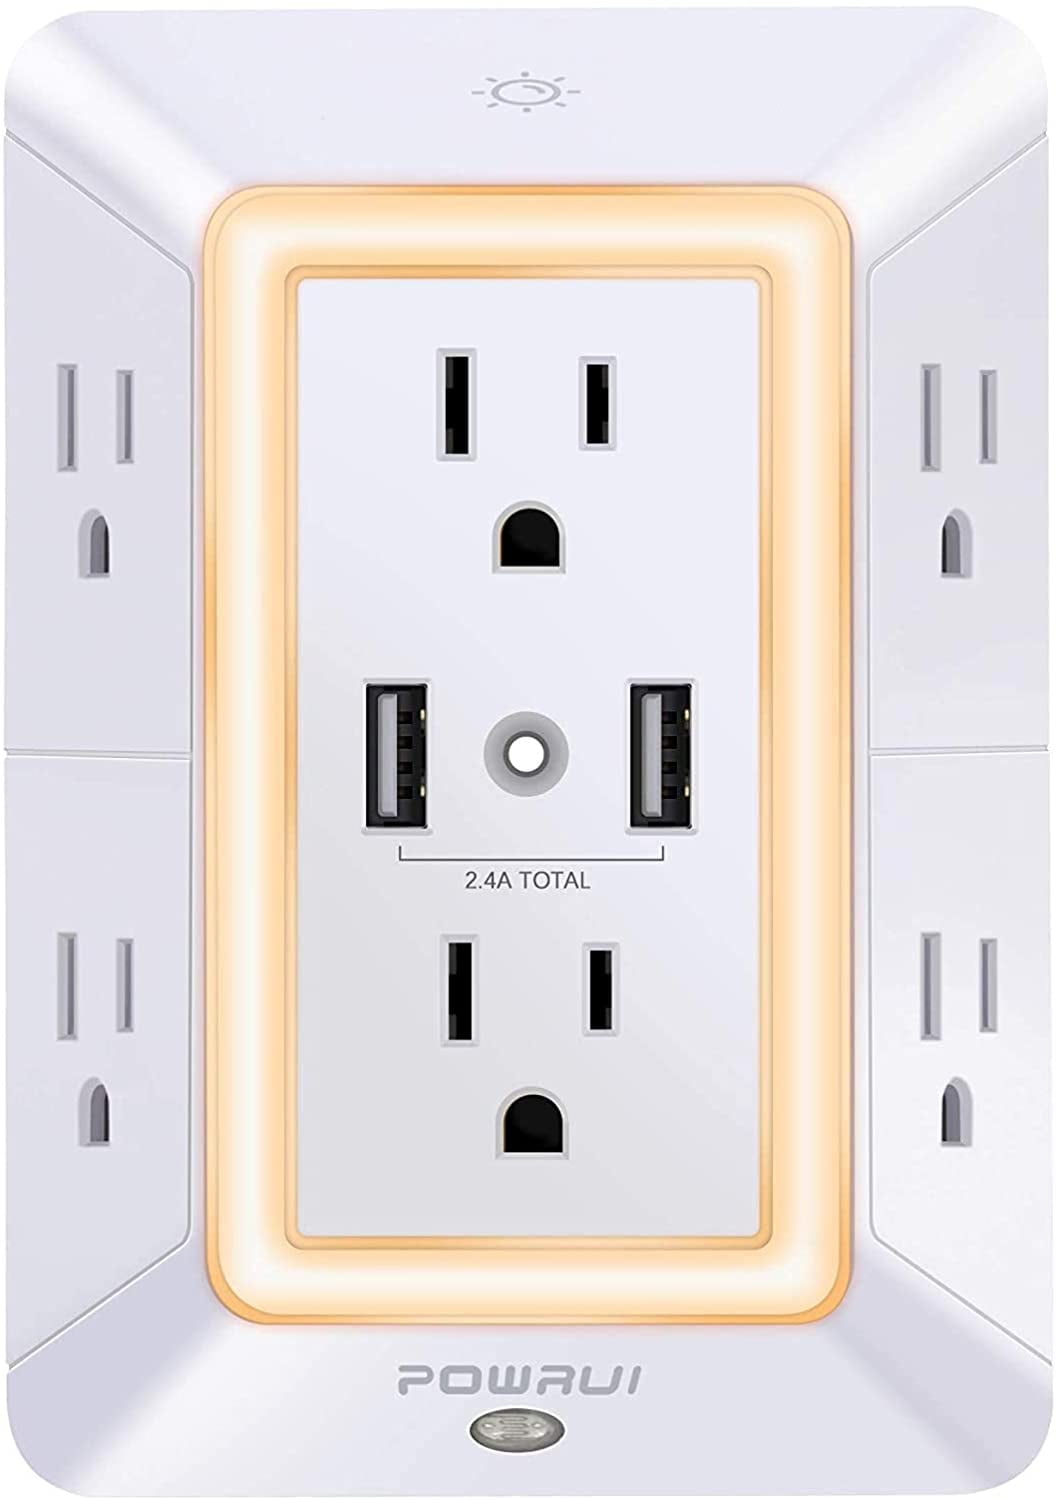 Wall Outlet Socket Power Charger Adapter With 2 Fast Charging Ports+3 AC Outlets 